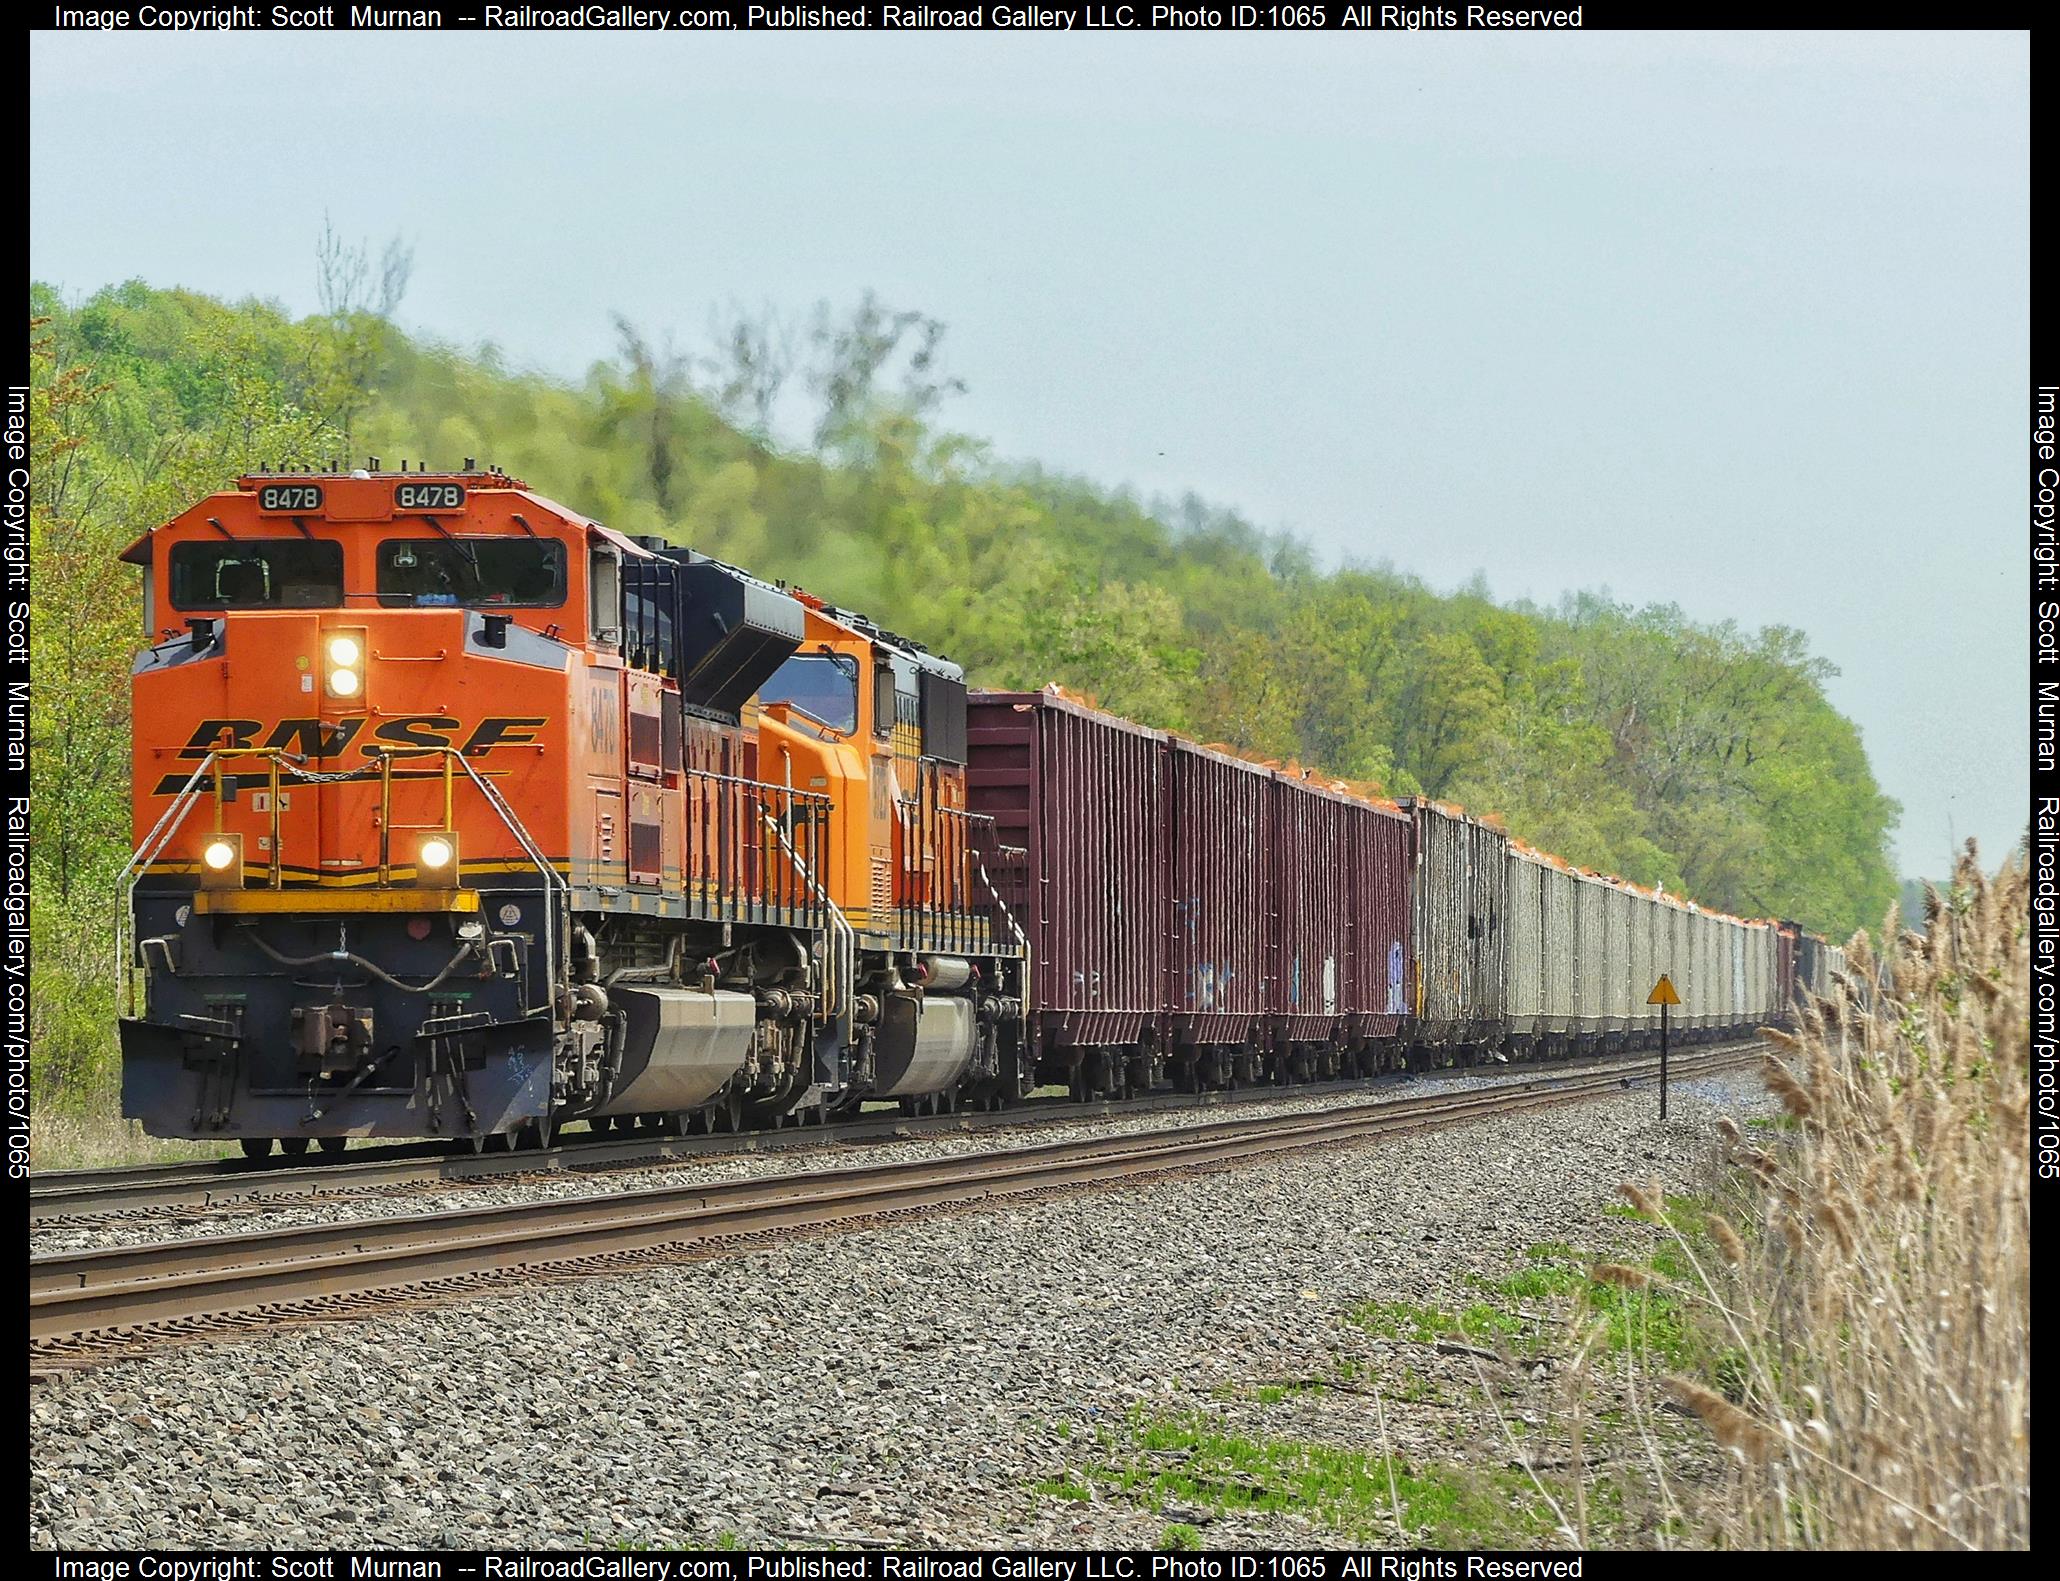 BNSF 8478 is a class EMD SD70ACe and  is pictured in Macedon, New York, United States.  This was taken along the Rochester Subdivision  on the CSX Transportation. Photo Copyright: Scott  Murnan  uploaded to Railroad Gallery on 05/12/2023. This photograph of BNSF 8478 was taken on Friday, May 12, 2023. All Rights Reserved. 